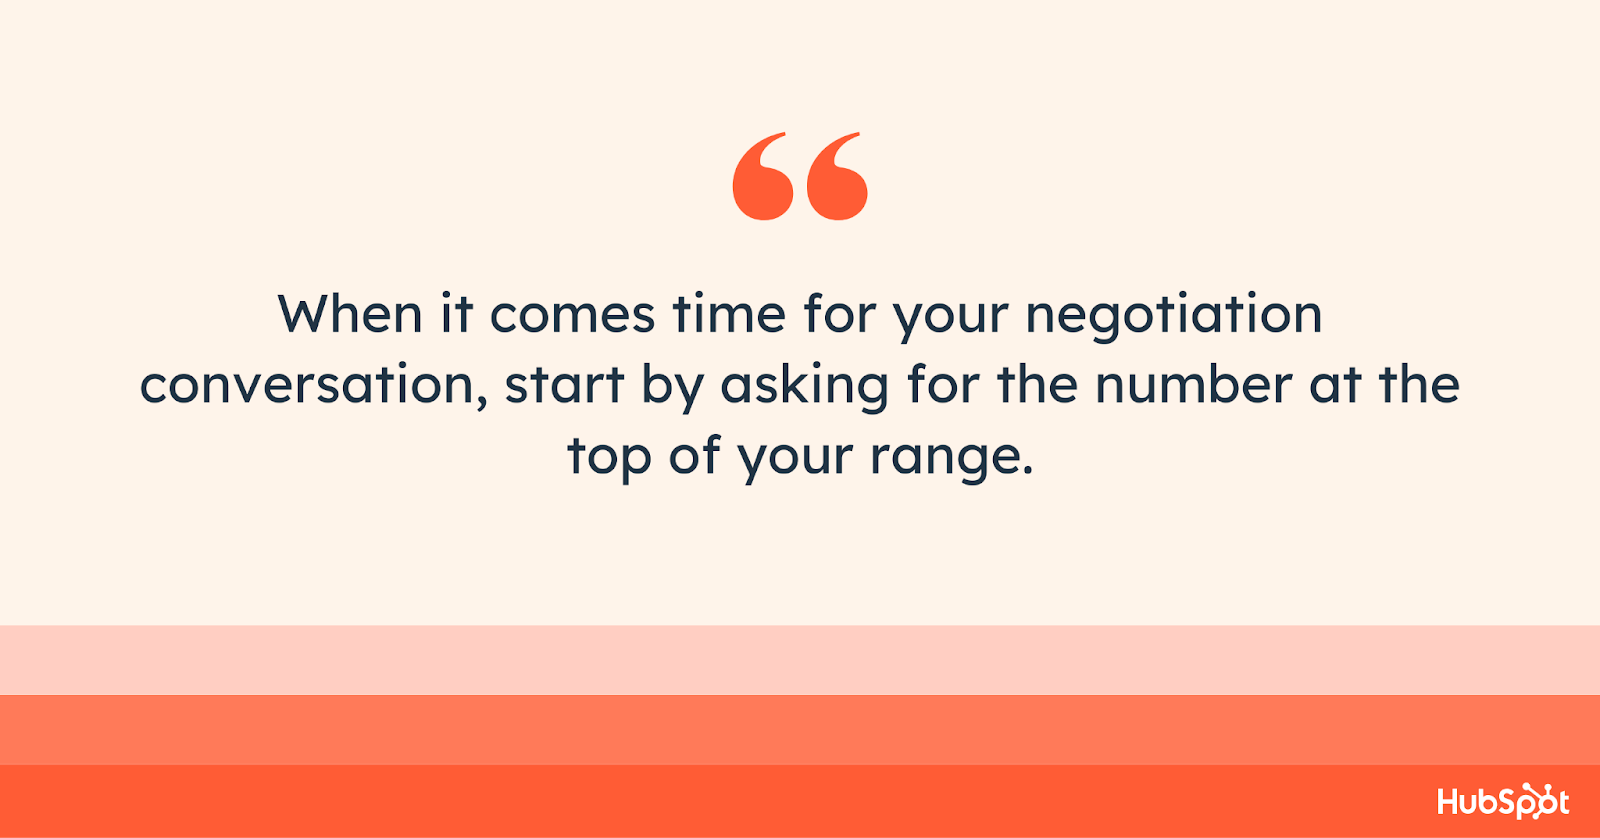 When it comes time for your negotiation conversation, ask for the number at the top of your range.